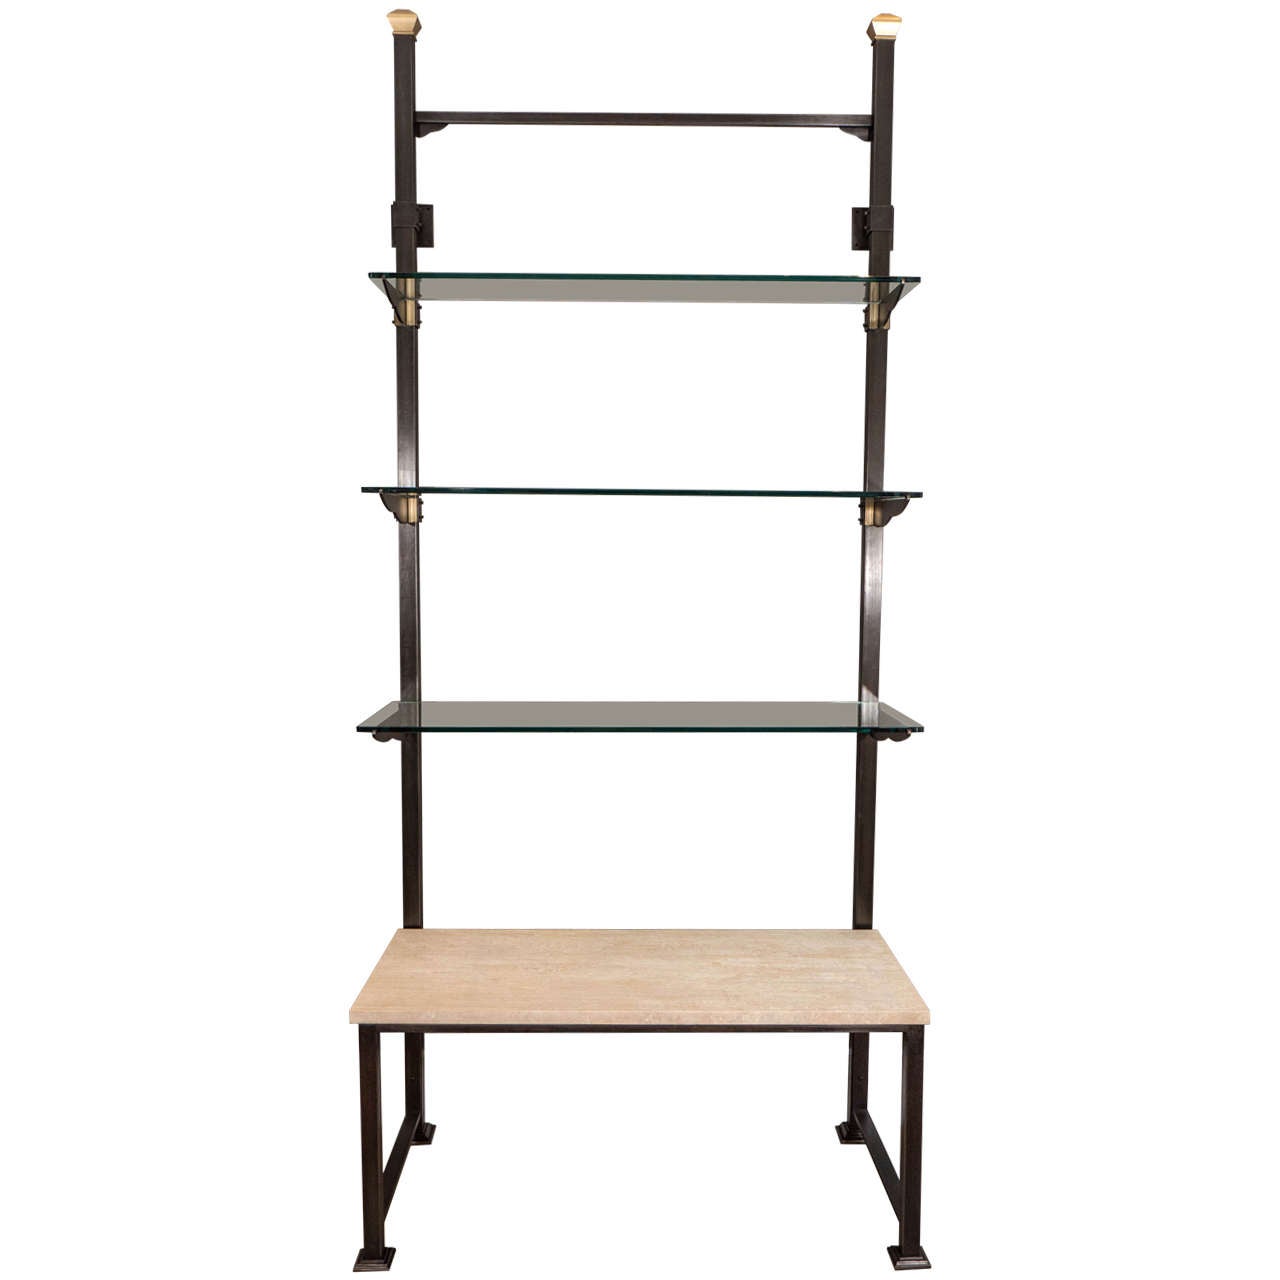 Viennese Secessionist Wall-Mounted Shelving System For Sale